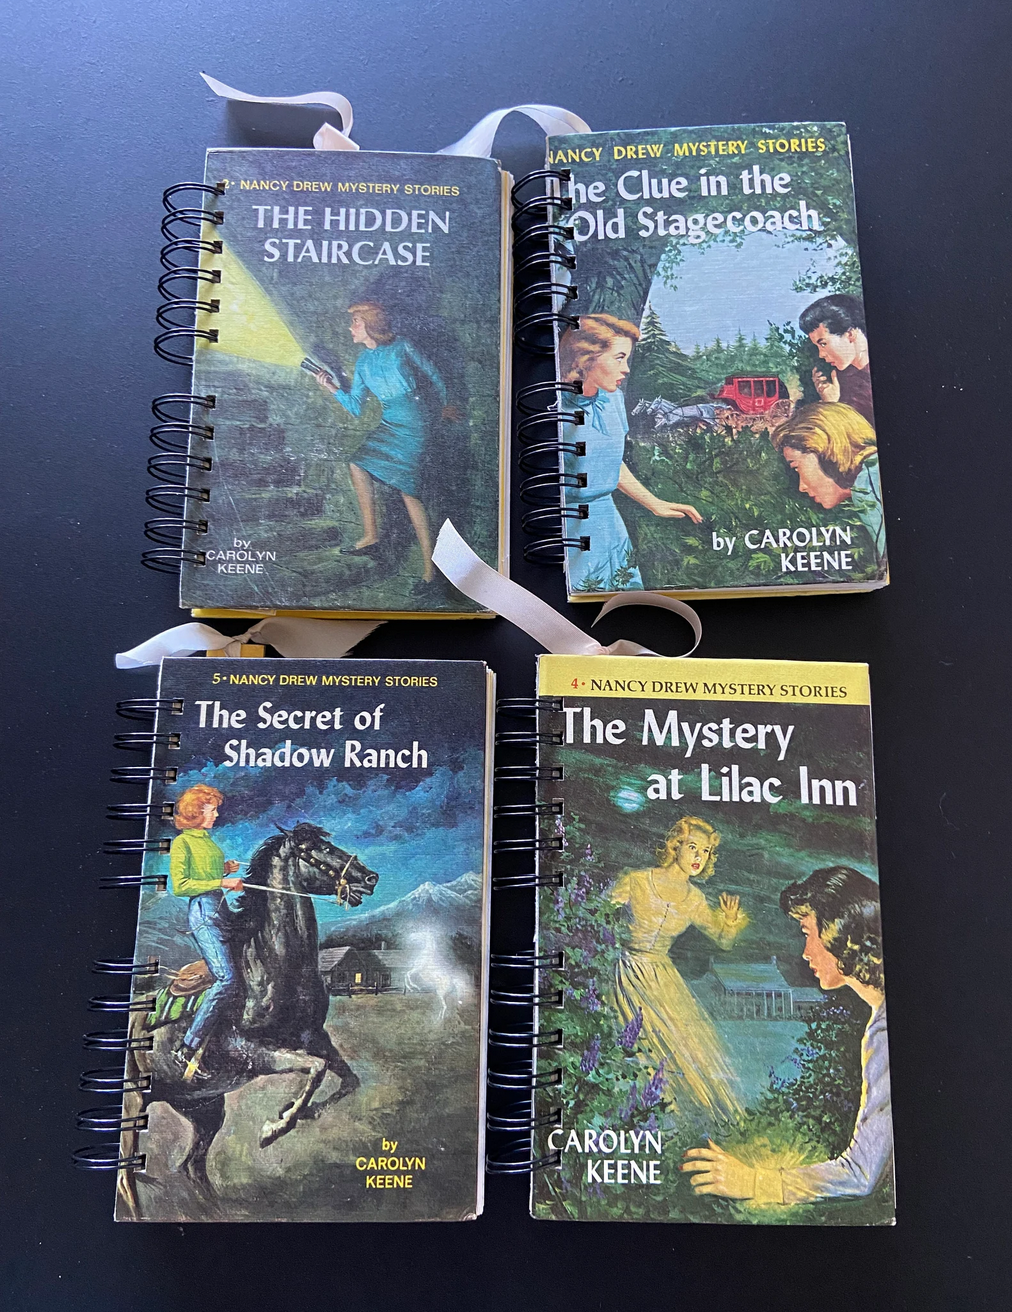 Four Nancy Drew books that have been repurposed into notebooks